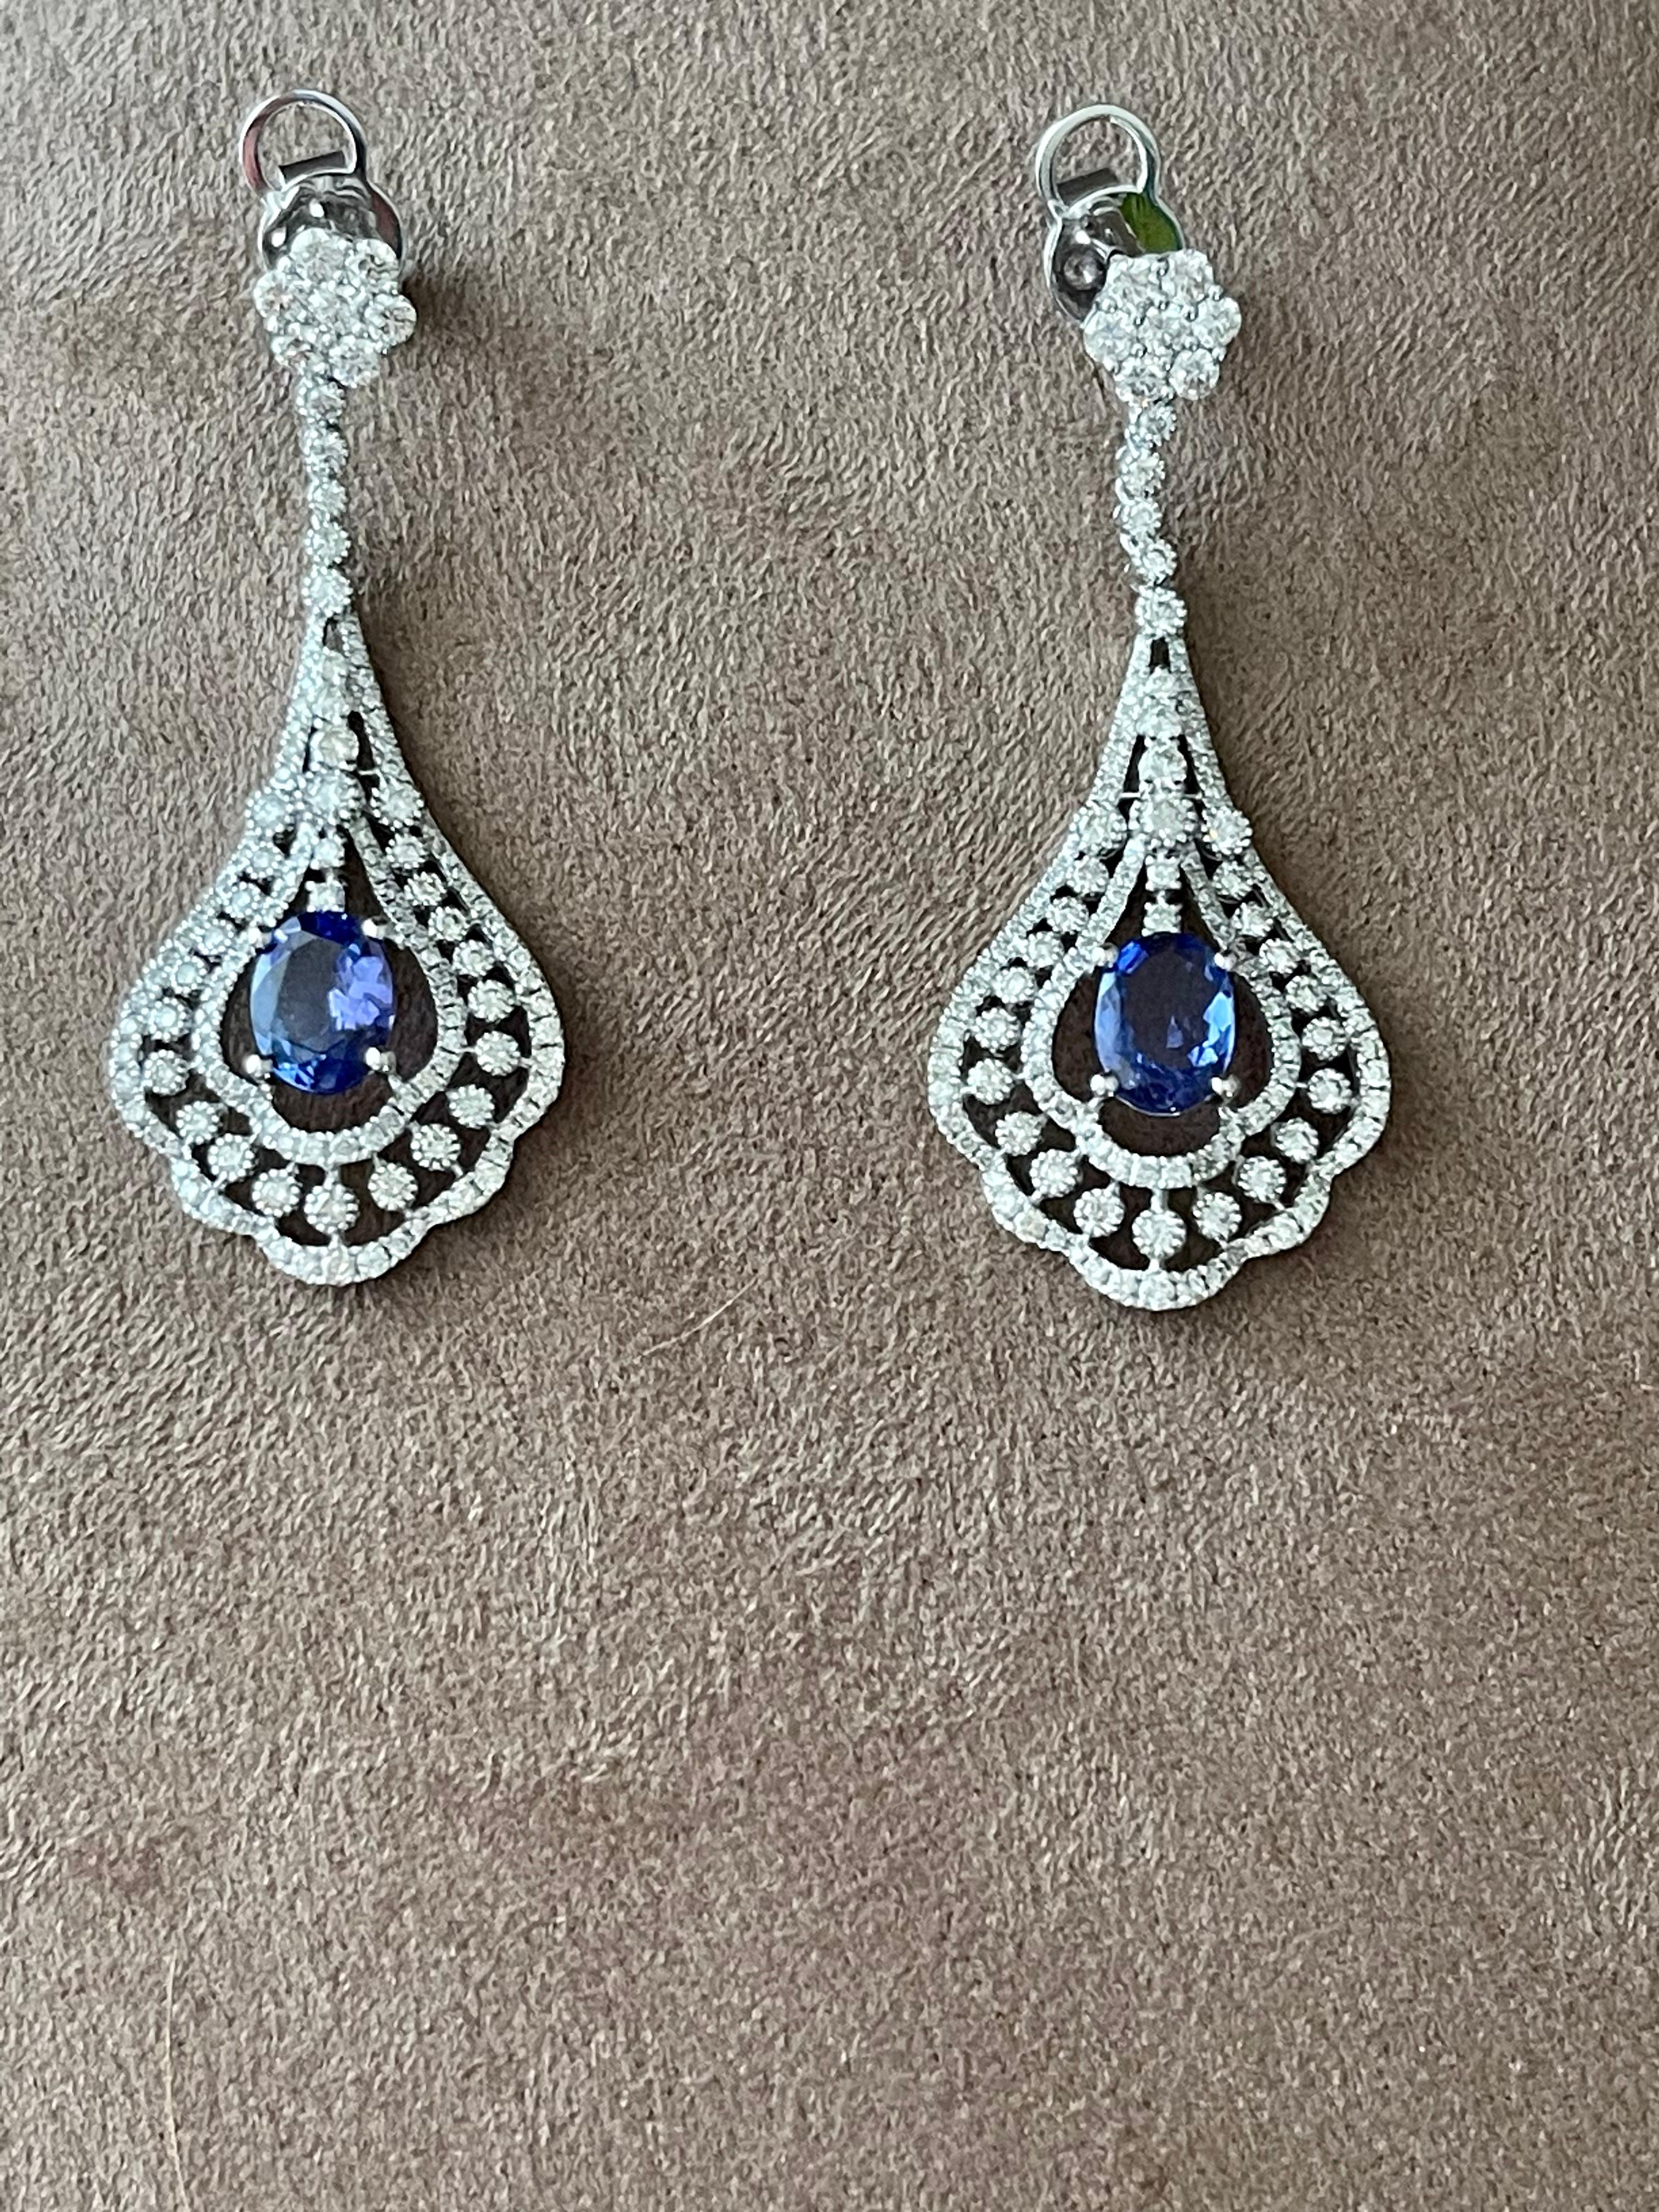 A pair of very elegant 18 K white Gold Chandelier earrings featuring 2 oval shape Tanzanites weighing 2.19 ct and 276 brilliant cut Diamonds weiging 2.38 ct. 
Dimensions: 5.0 cm x 1.90 cm.  Weight: 9.08 grams. 
QUESTIONS?  Contact us right away if